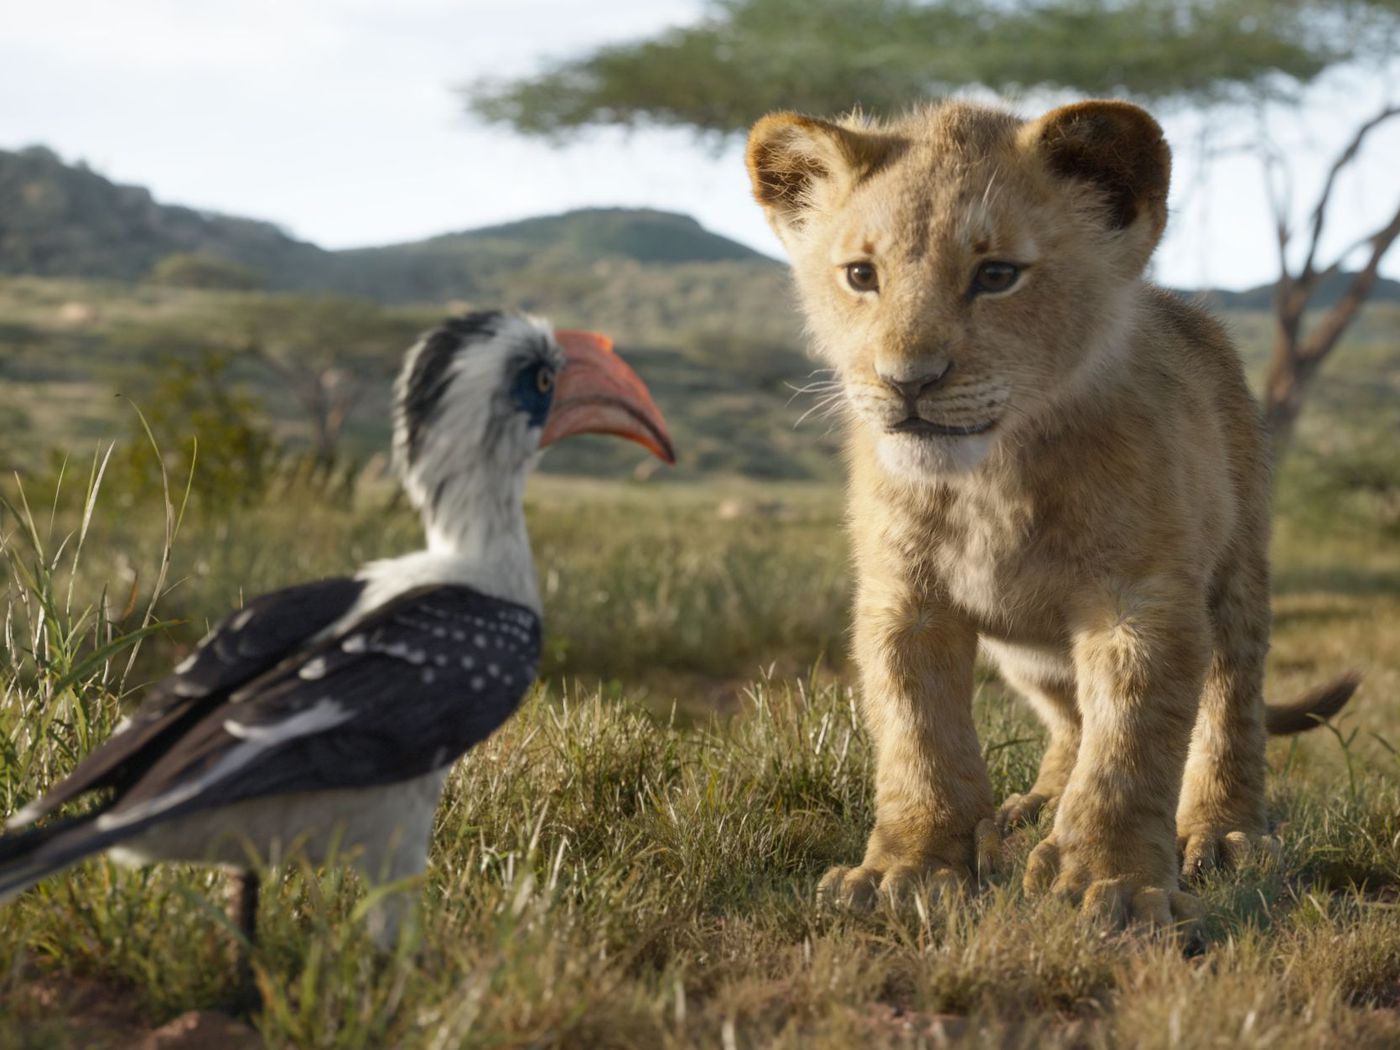 A lion and bird standing in the grass - The Lion King